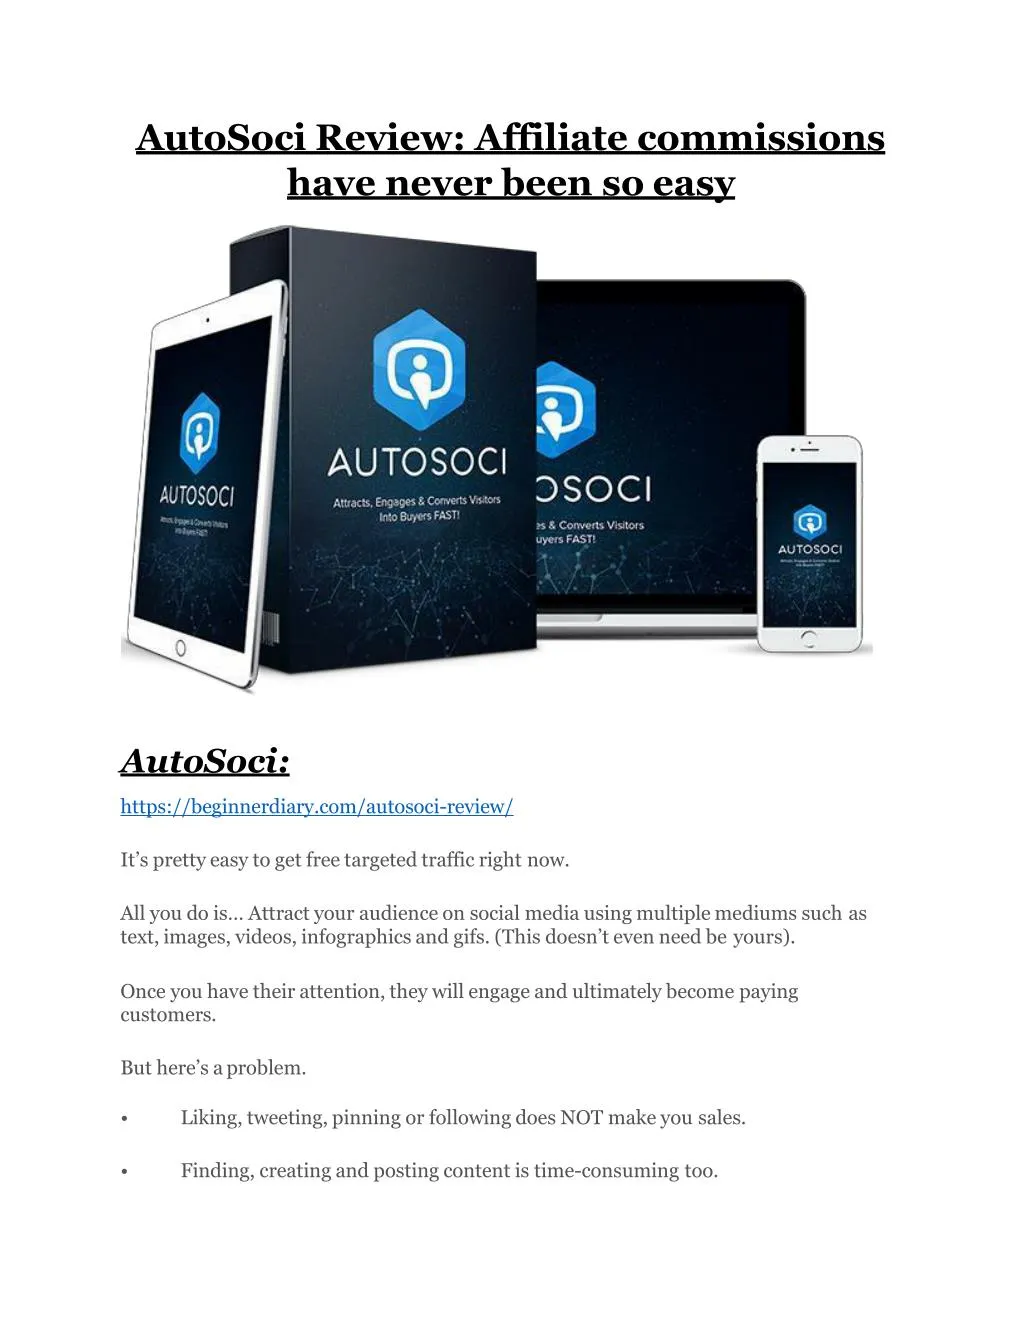 autosoci review affiliate commissions have never